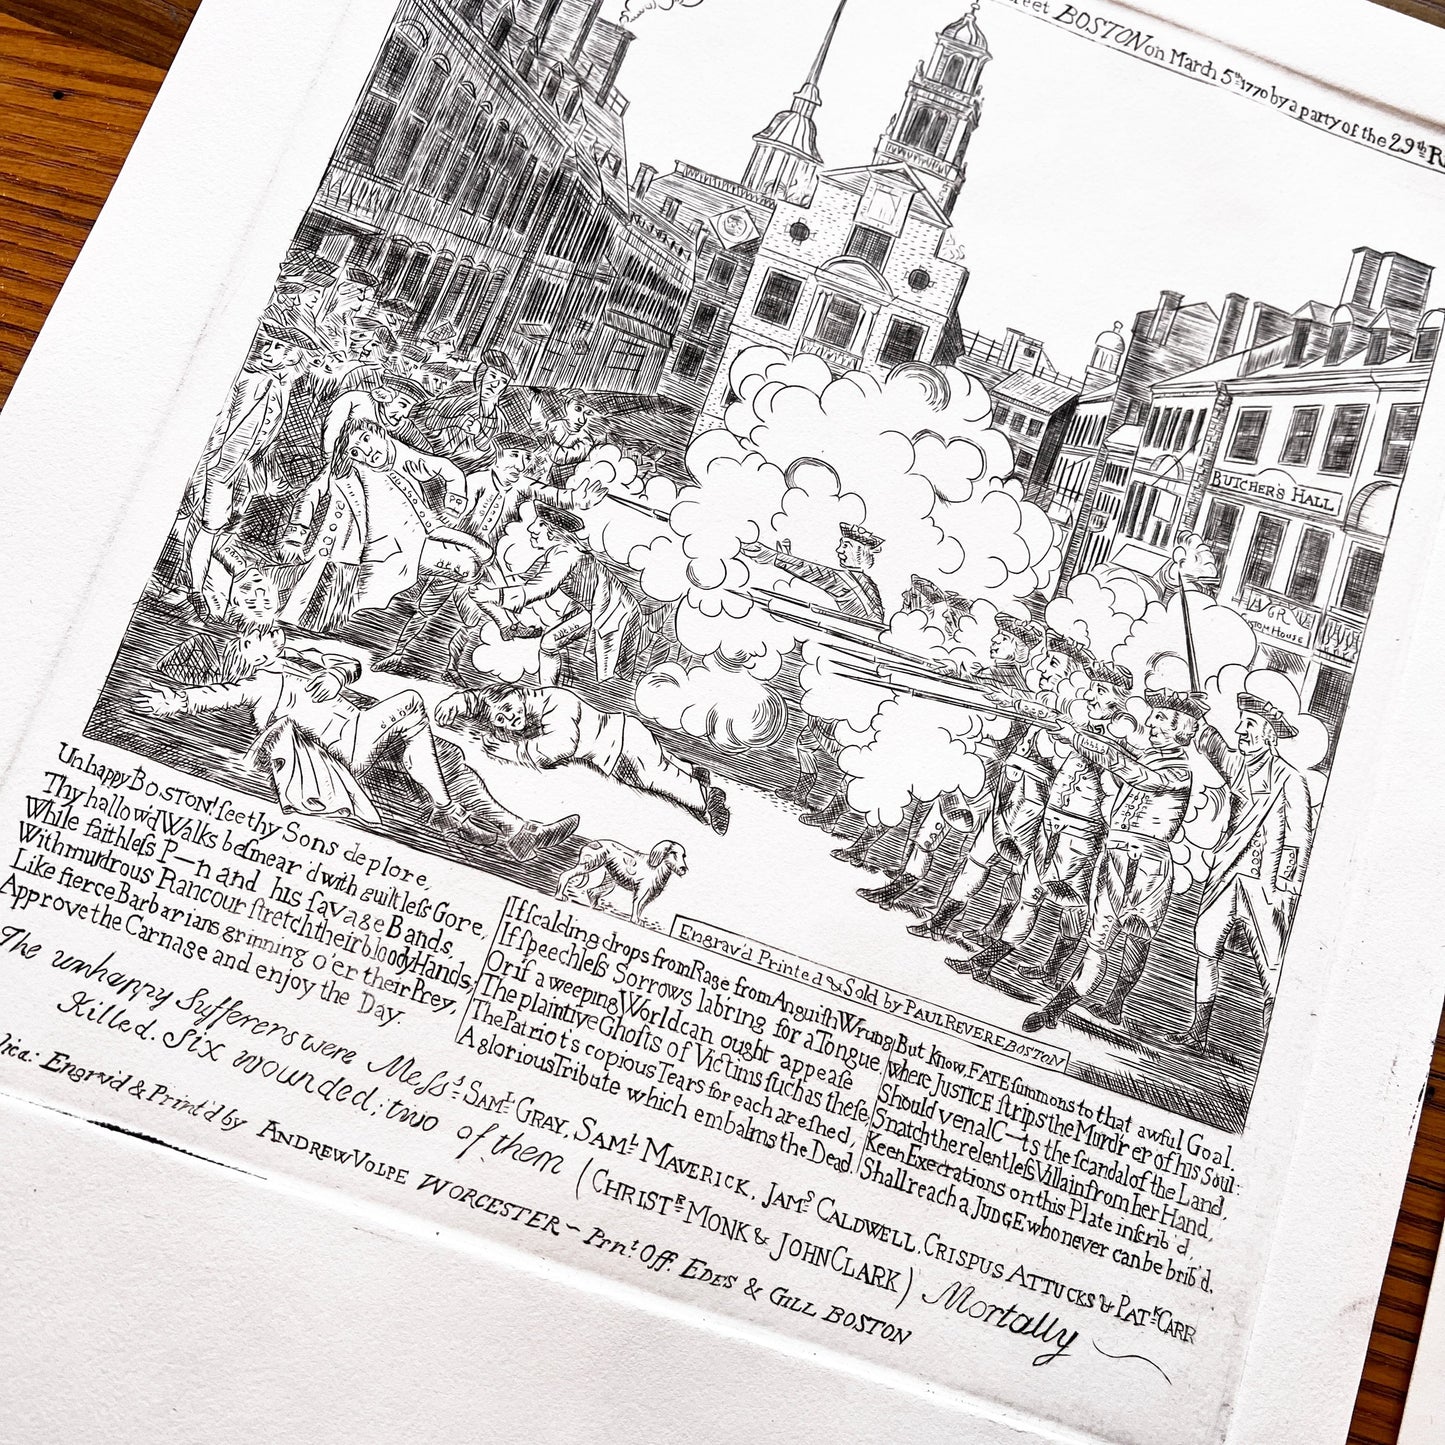 Black and White Boston Massacre Hand-Engraved print, after Revere from the History List store